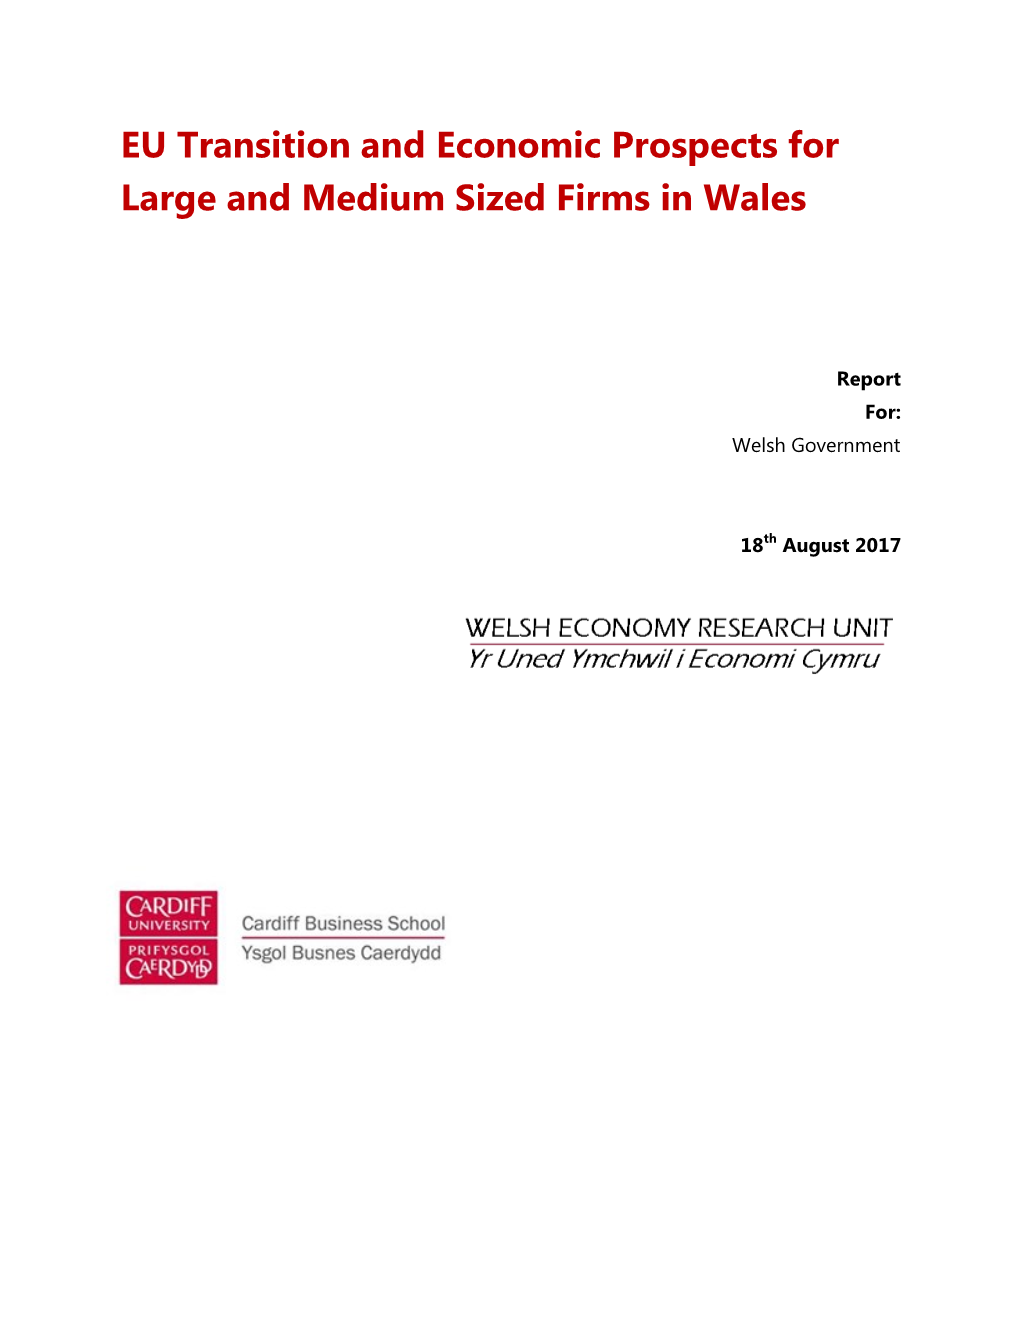 EU Transition and Economic Prospects for Large and Medium Sized Firms in Wales